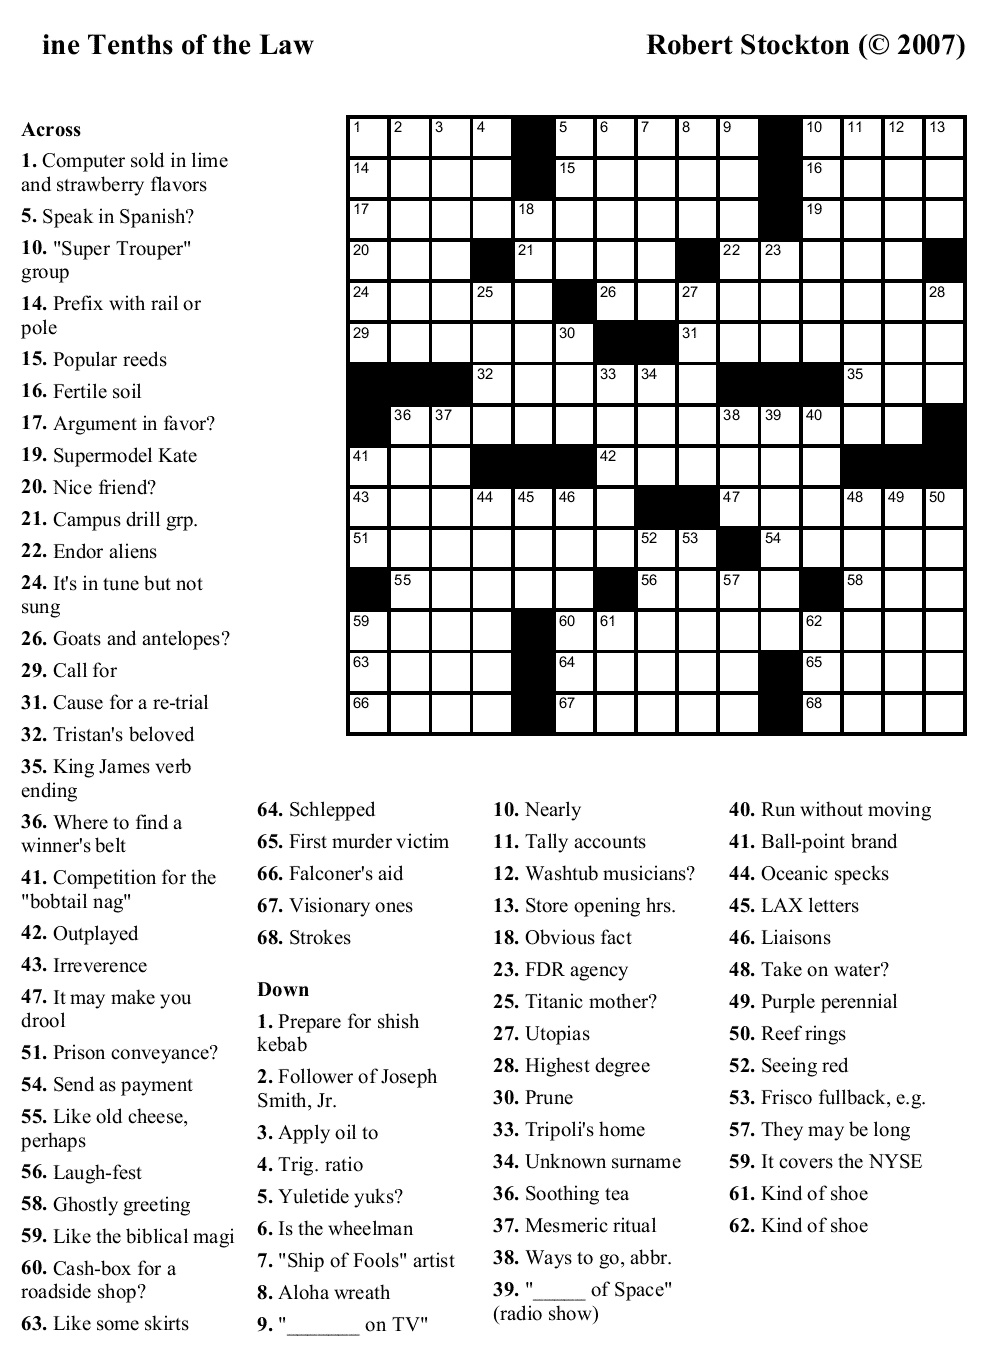 Crossword Puzzles Printable - Yahoo Image Search Results | Crossword - Printable Crossword Puzzle For Today